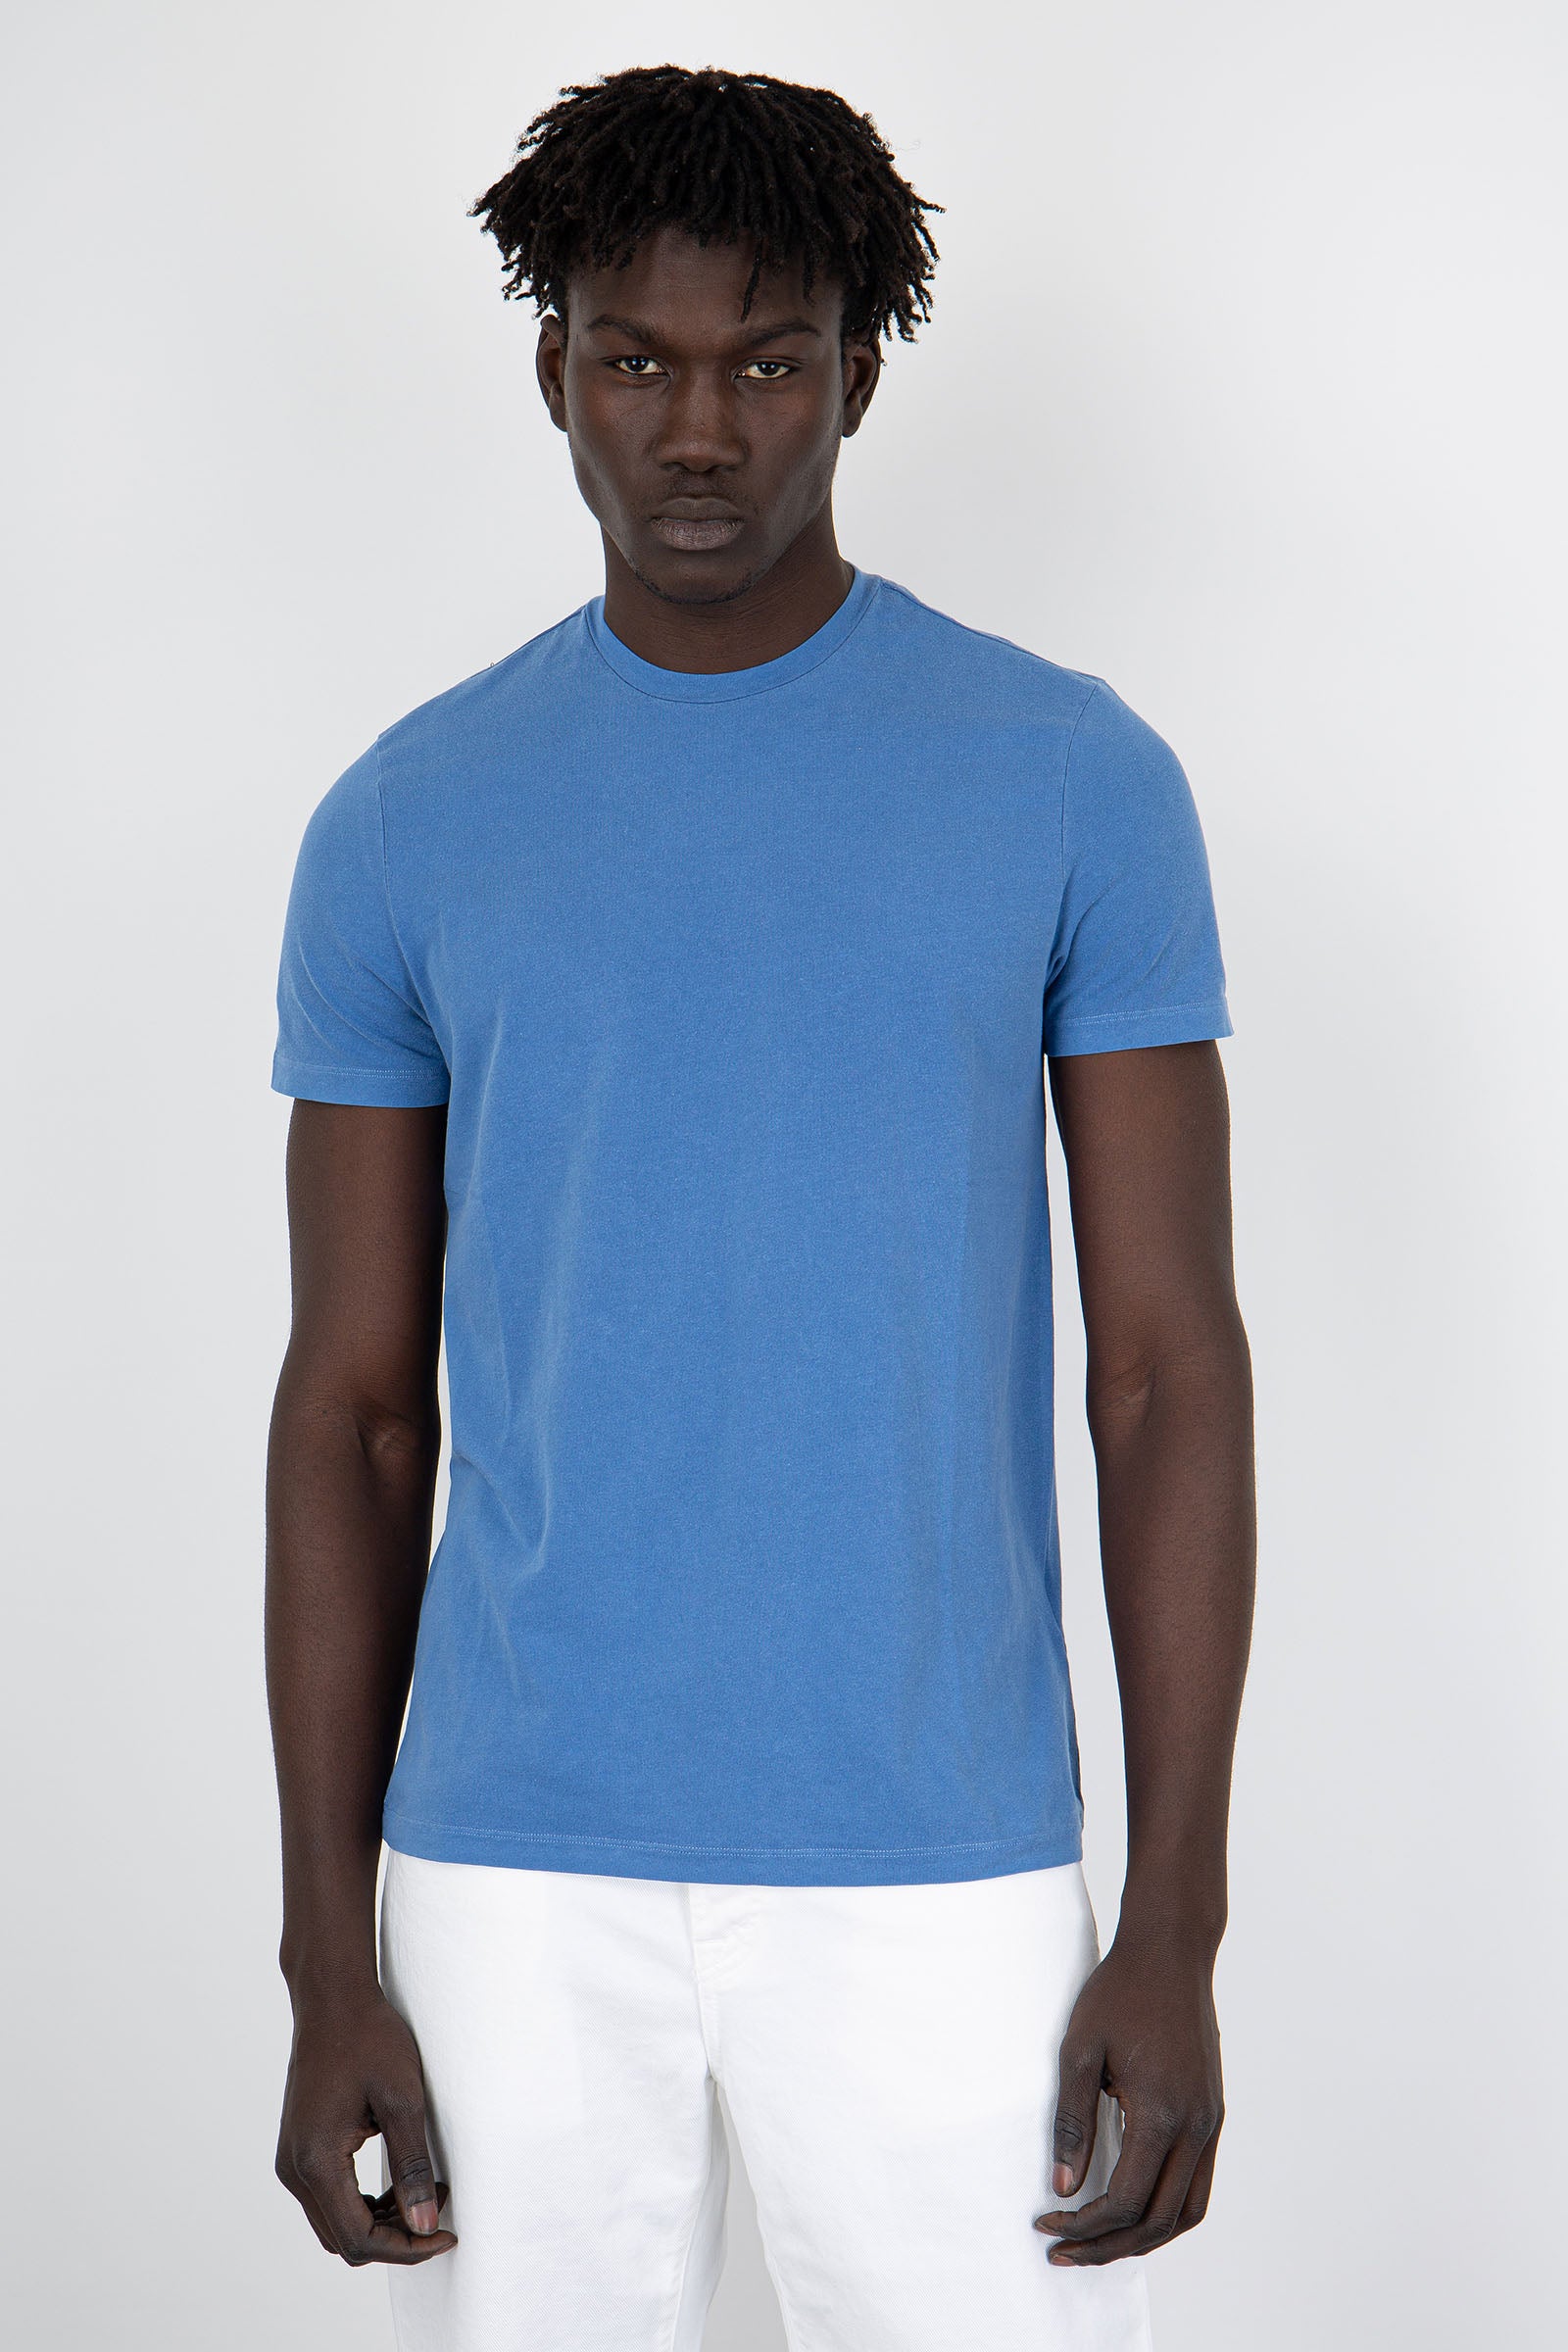 Majestic Filatures Harold T-Shirt in China Blue Cotton - 4